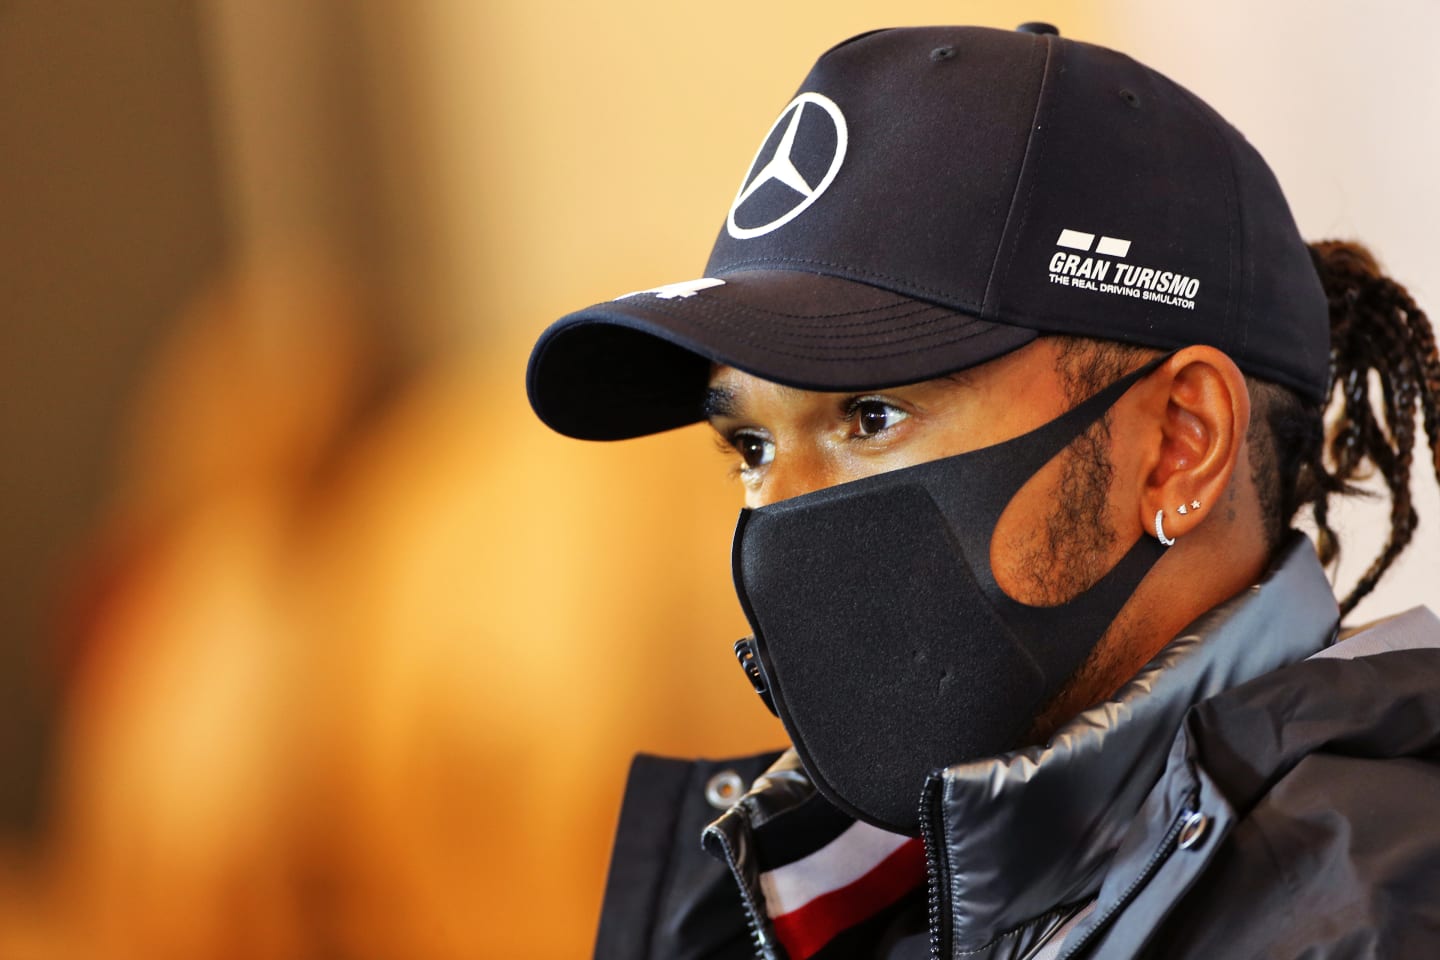 NUERBURG, GERMANY - OCTOBER 08: Lewis Hamilton of Great Britain and Mercedes GP talks in the